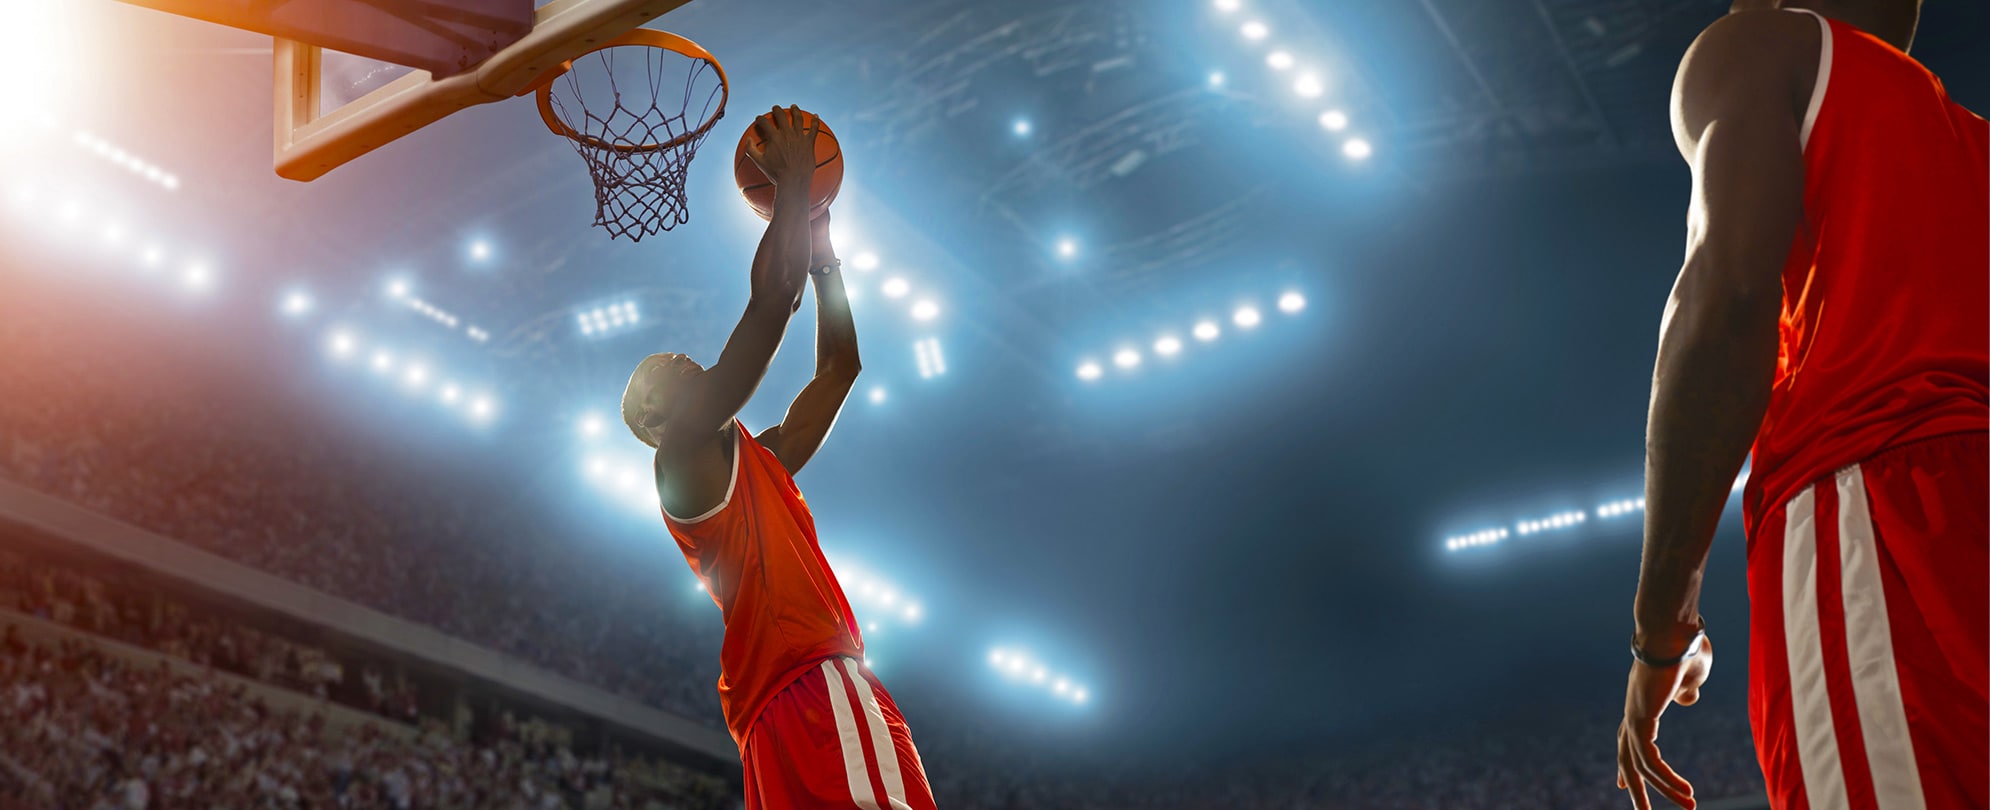 A basketball player holding a basketball and jumping for a reverse dunk at the net